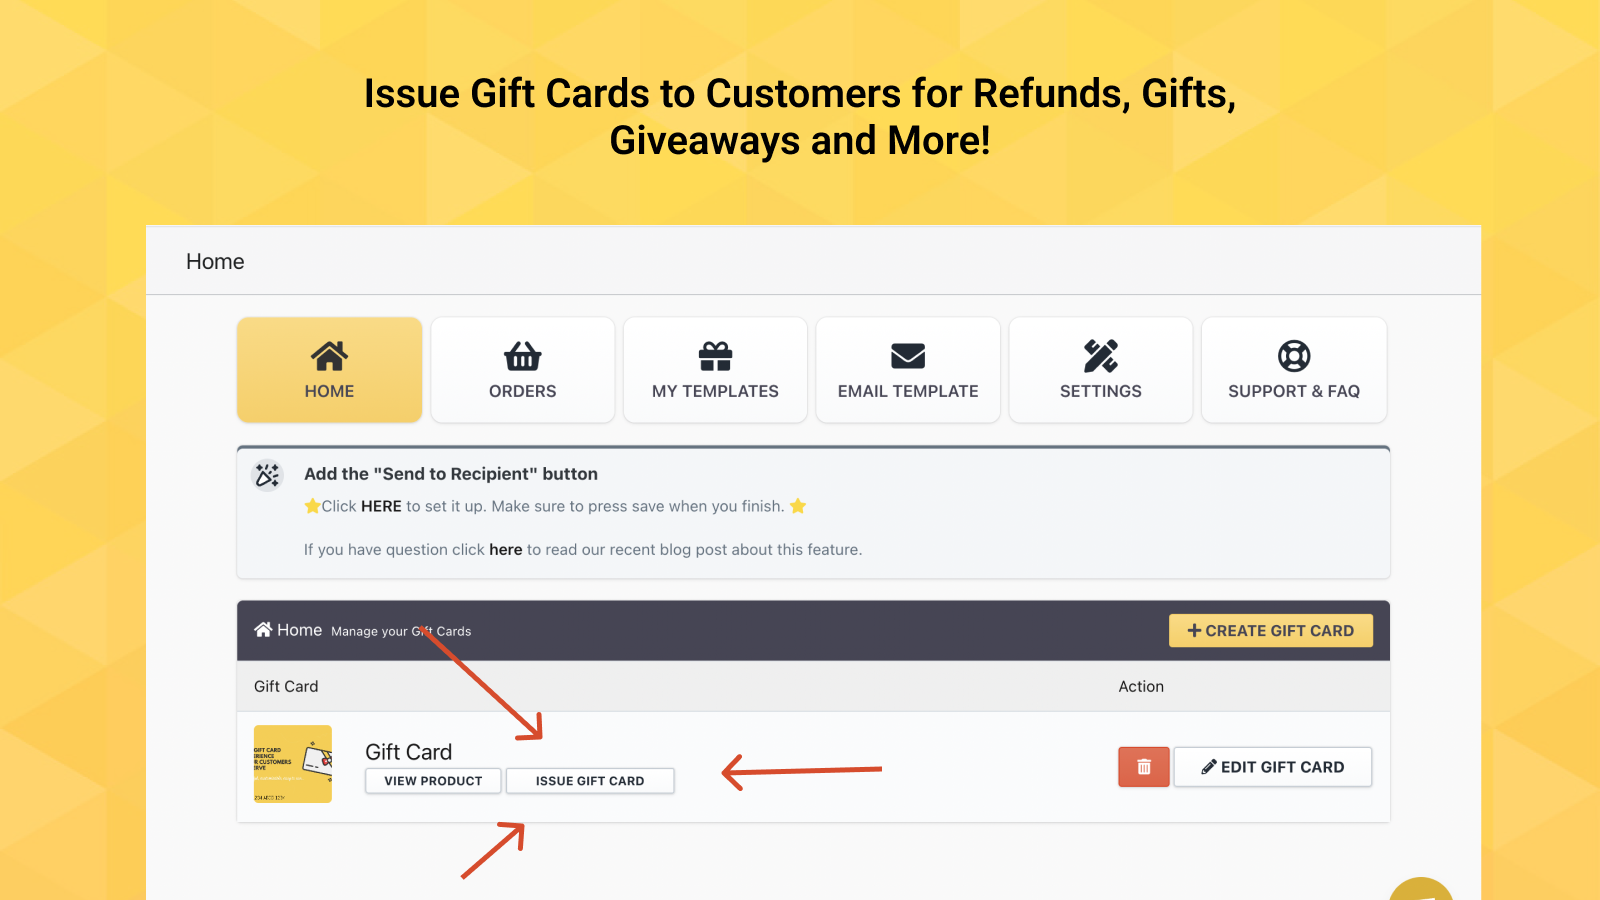 Incentivize your customers by easily sending gift cards to them